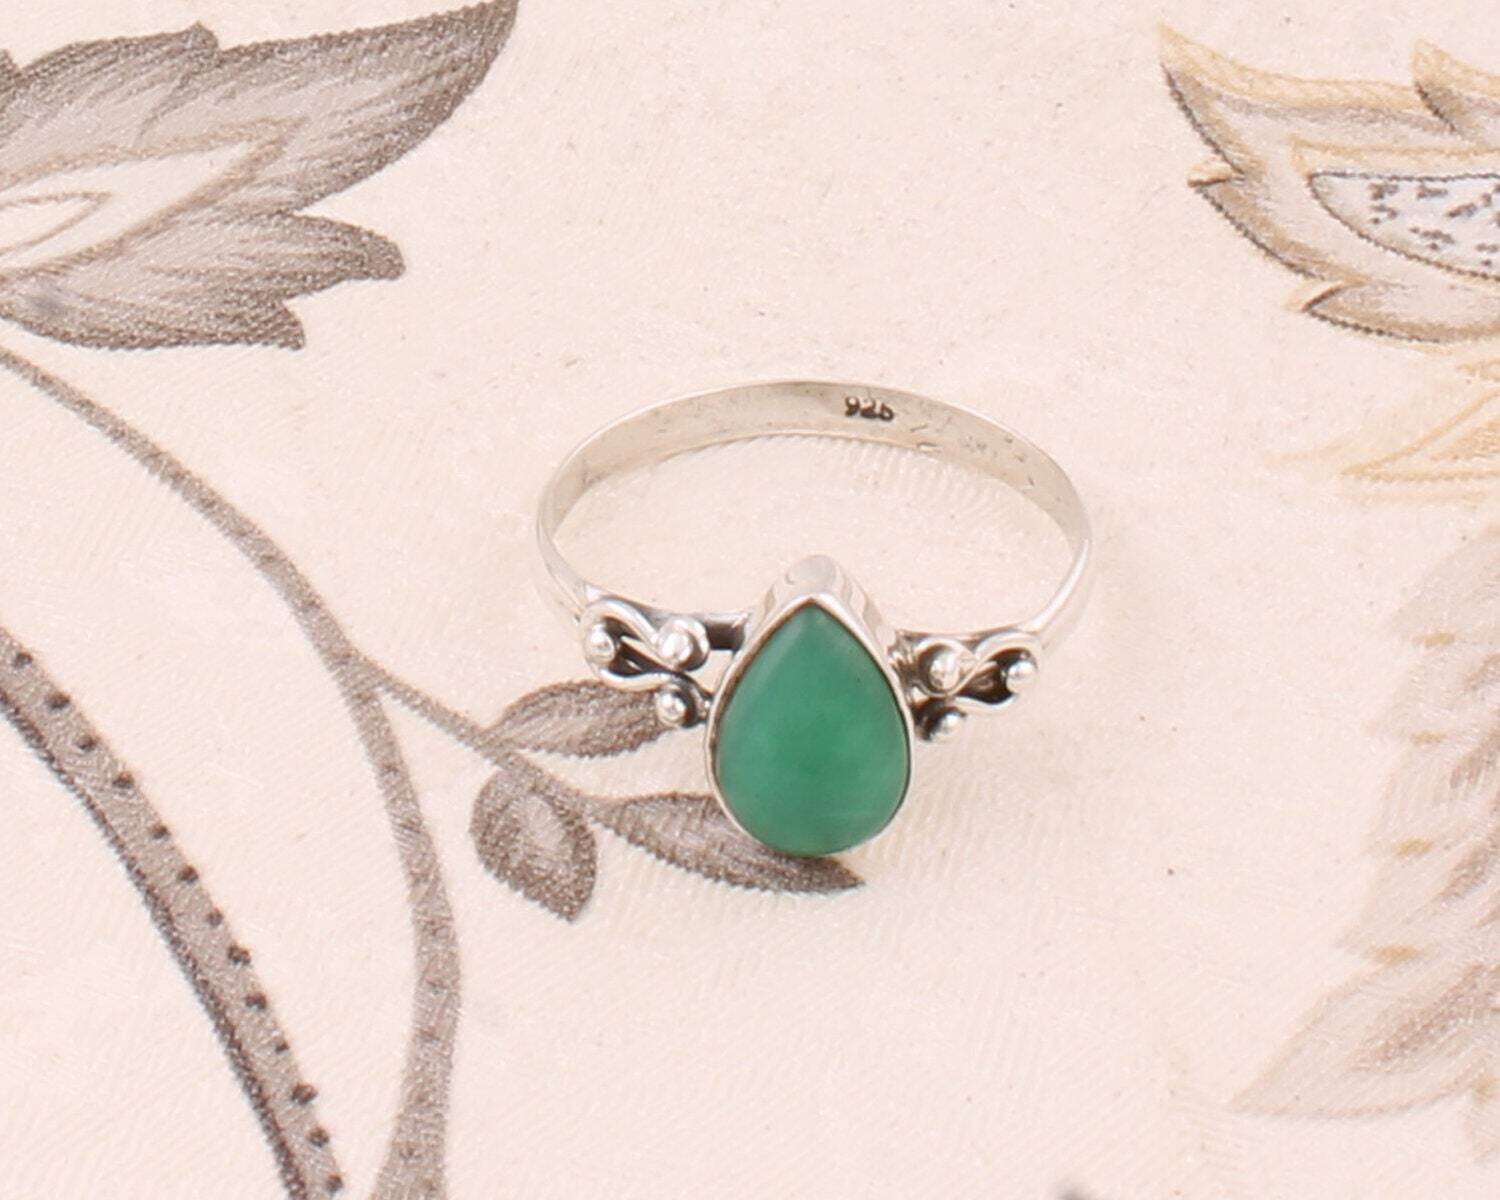 Index Finger Ring Gift For You ! With Natural Green Jade AAA+Quality Gemstone Handcrafted Ring Solid 925 Sterling Silver Ring Lovely Gift